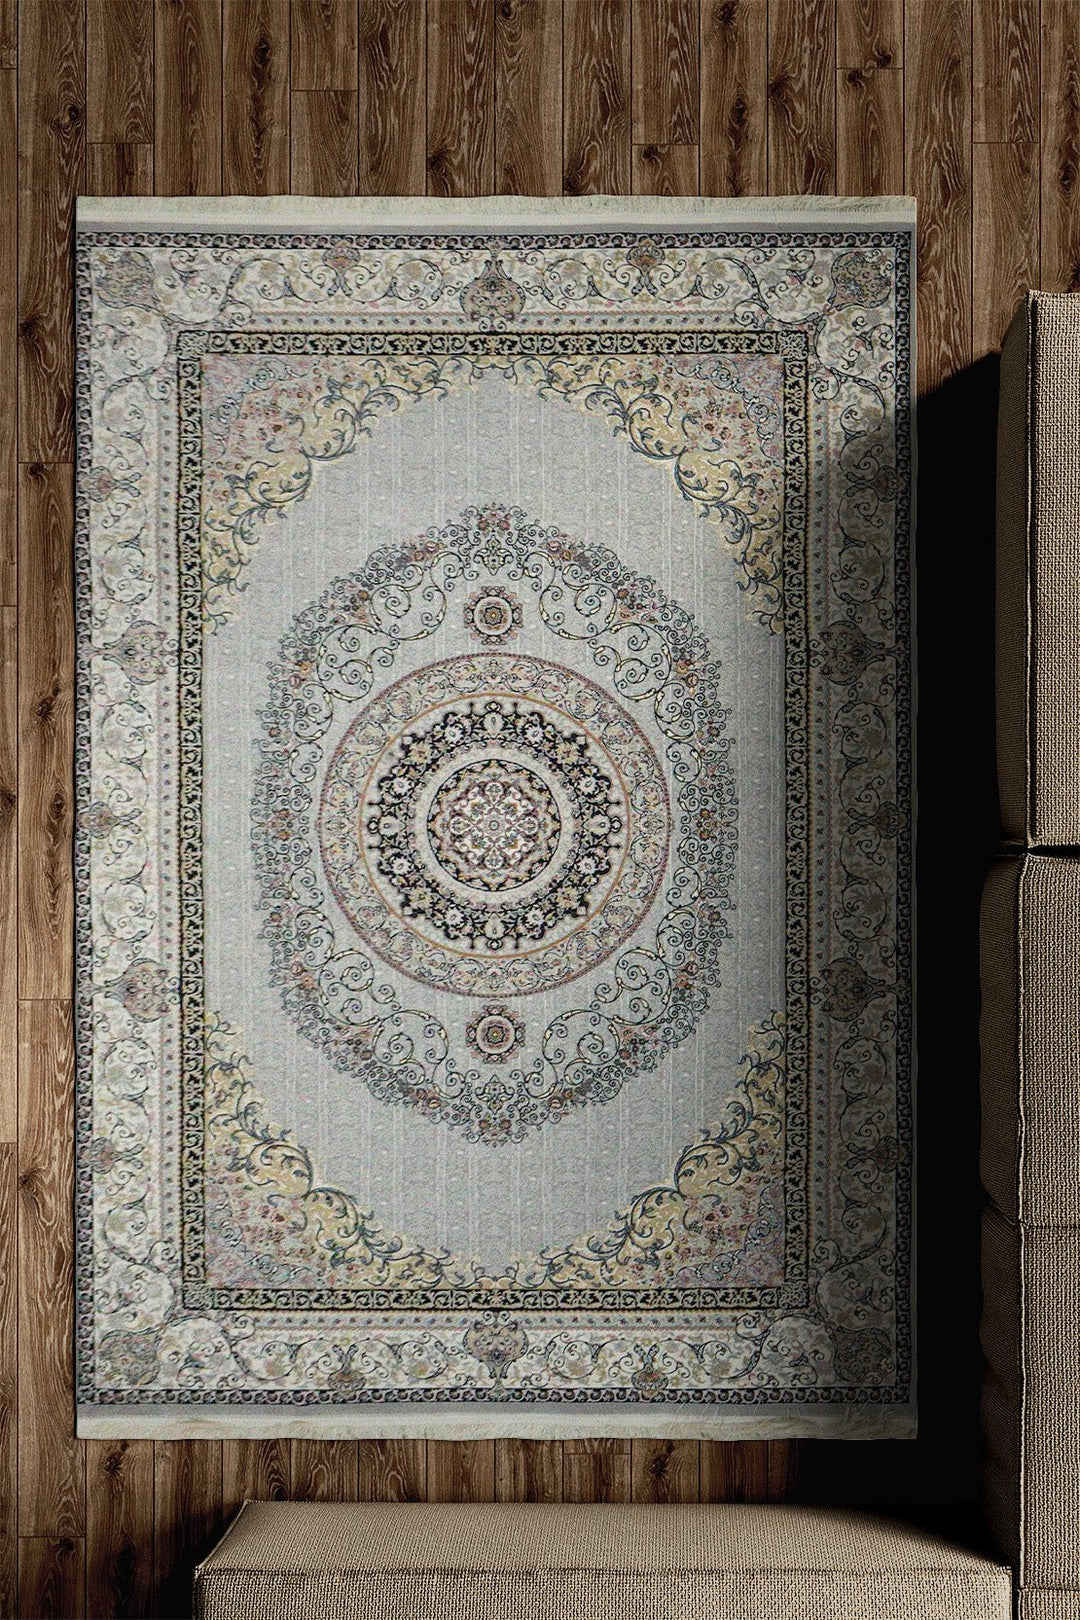 Iranian Premium Quality Hedyeh Collection (1000) Rug - 4.9 x 7.3 FT - Cream - Resilient Construction for Long-Lasting Use - V Surfaces